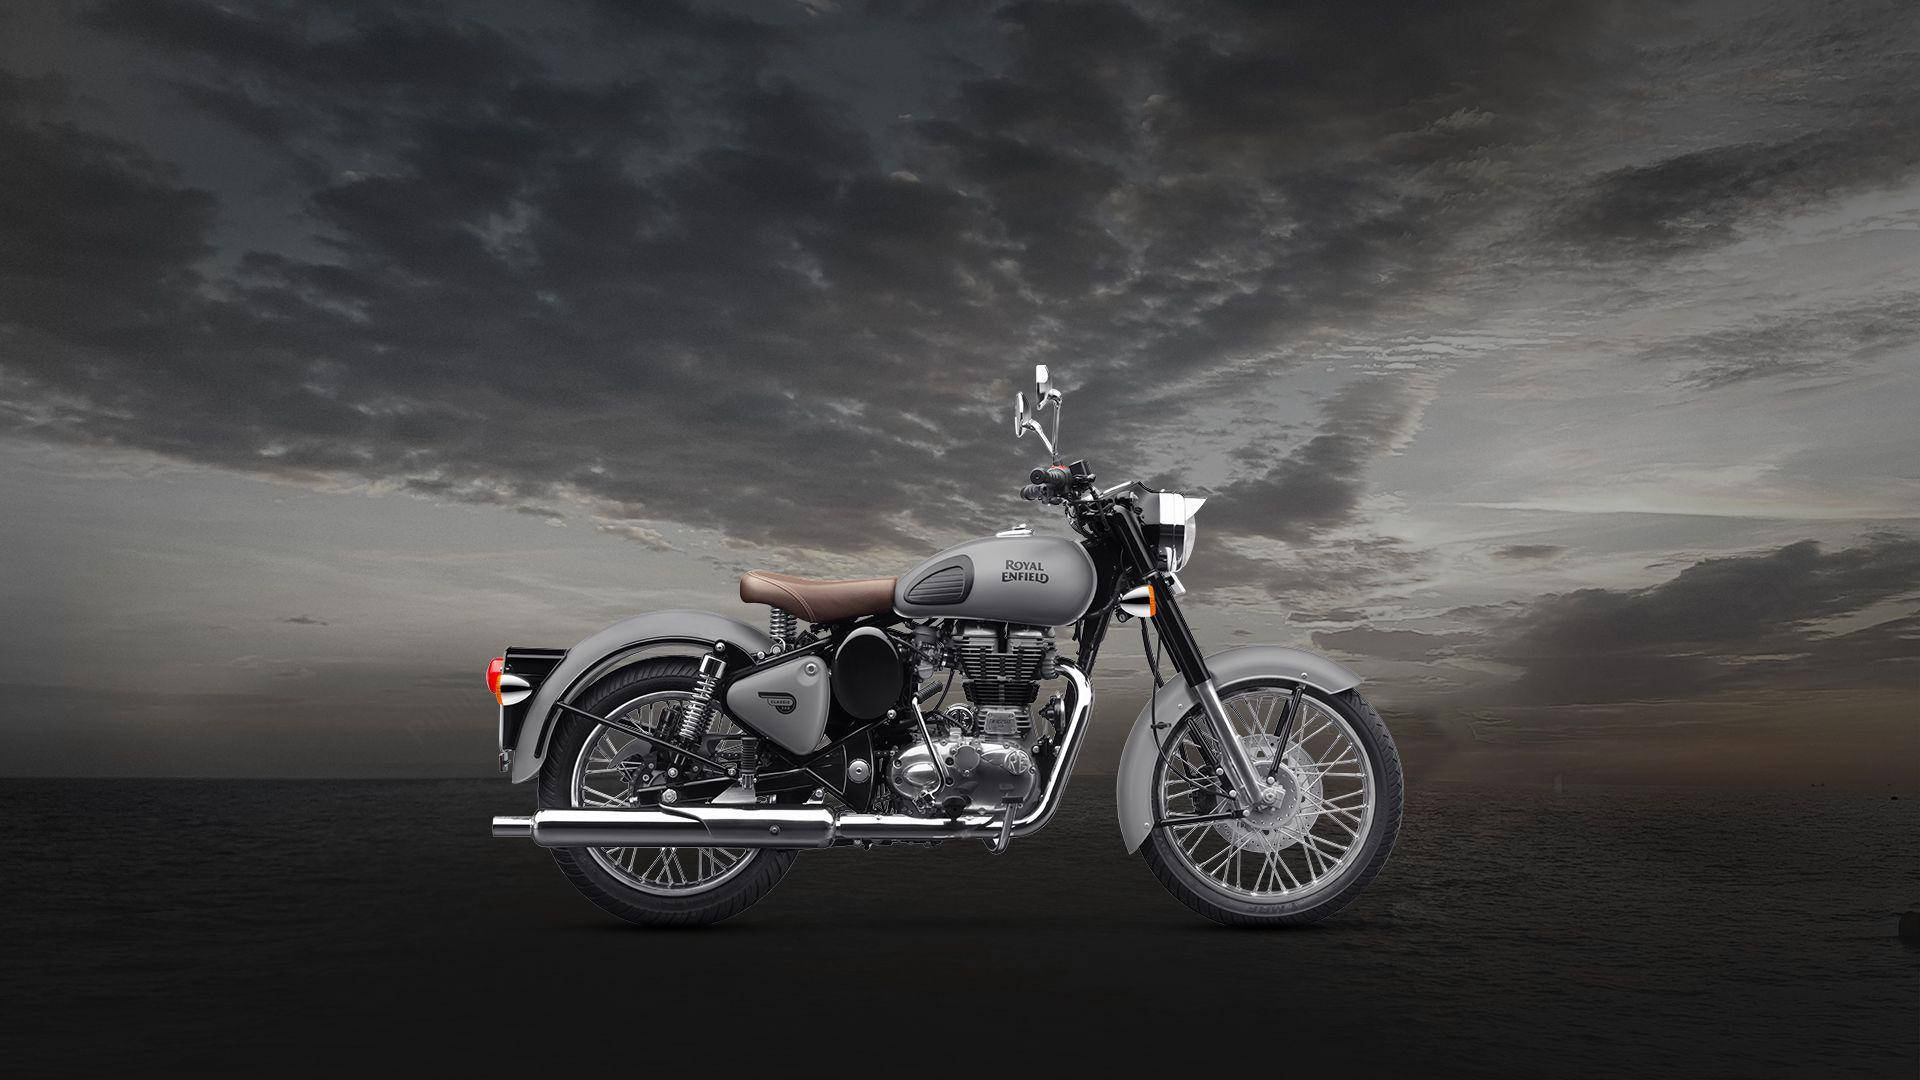 Caption: Majestic Classic 350 Royal Enfield In Hd